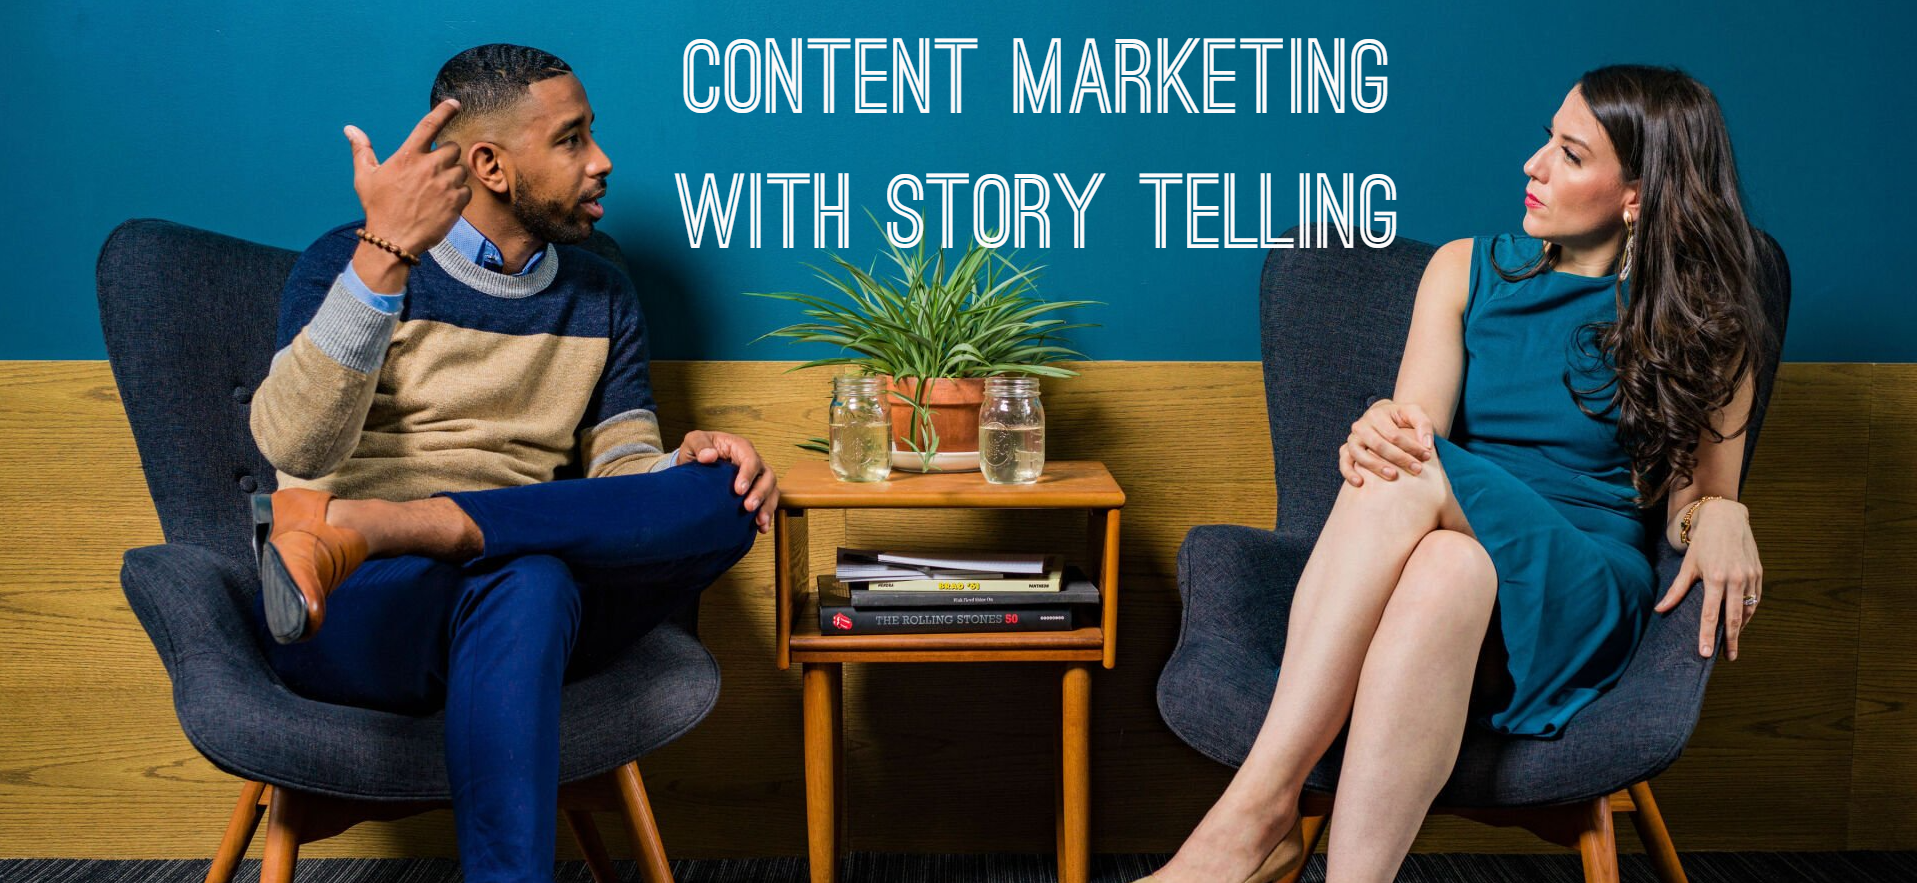 Local Content Marketing with Story Telling